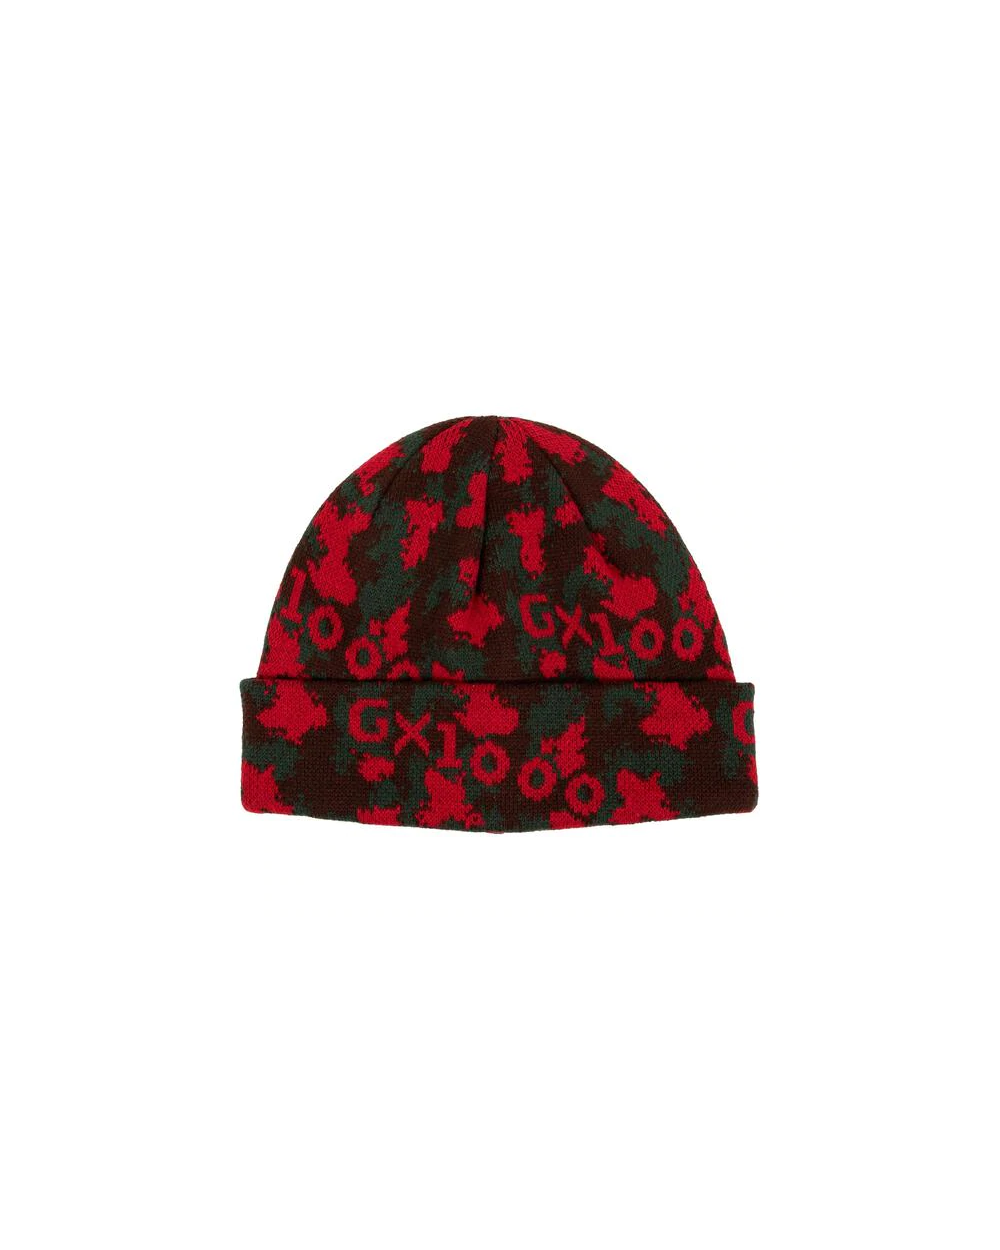 TRENCHED CAMO BEANIE